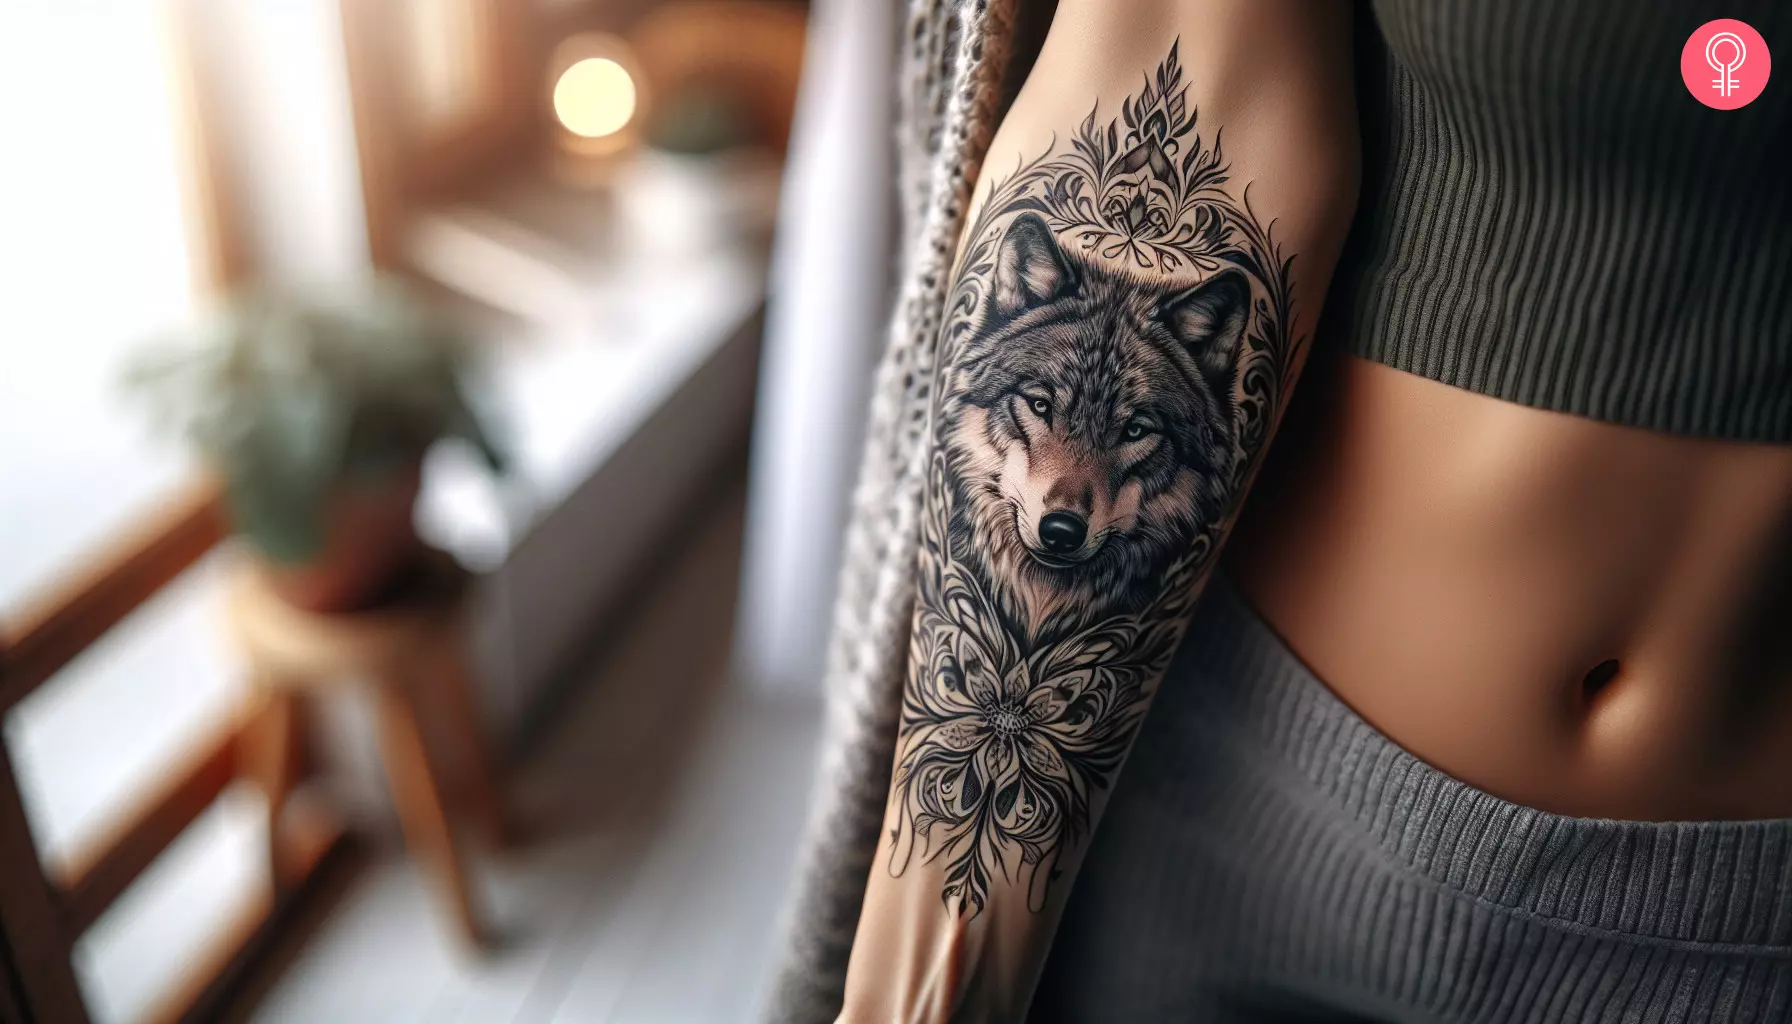 A wolf tattoo design on the forearm of a woman